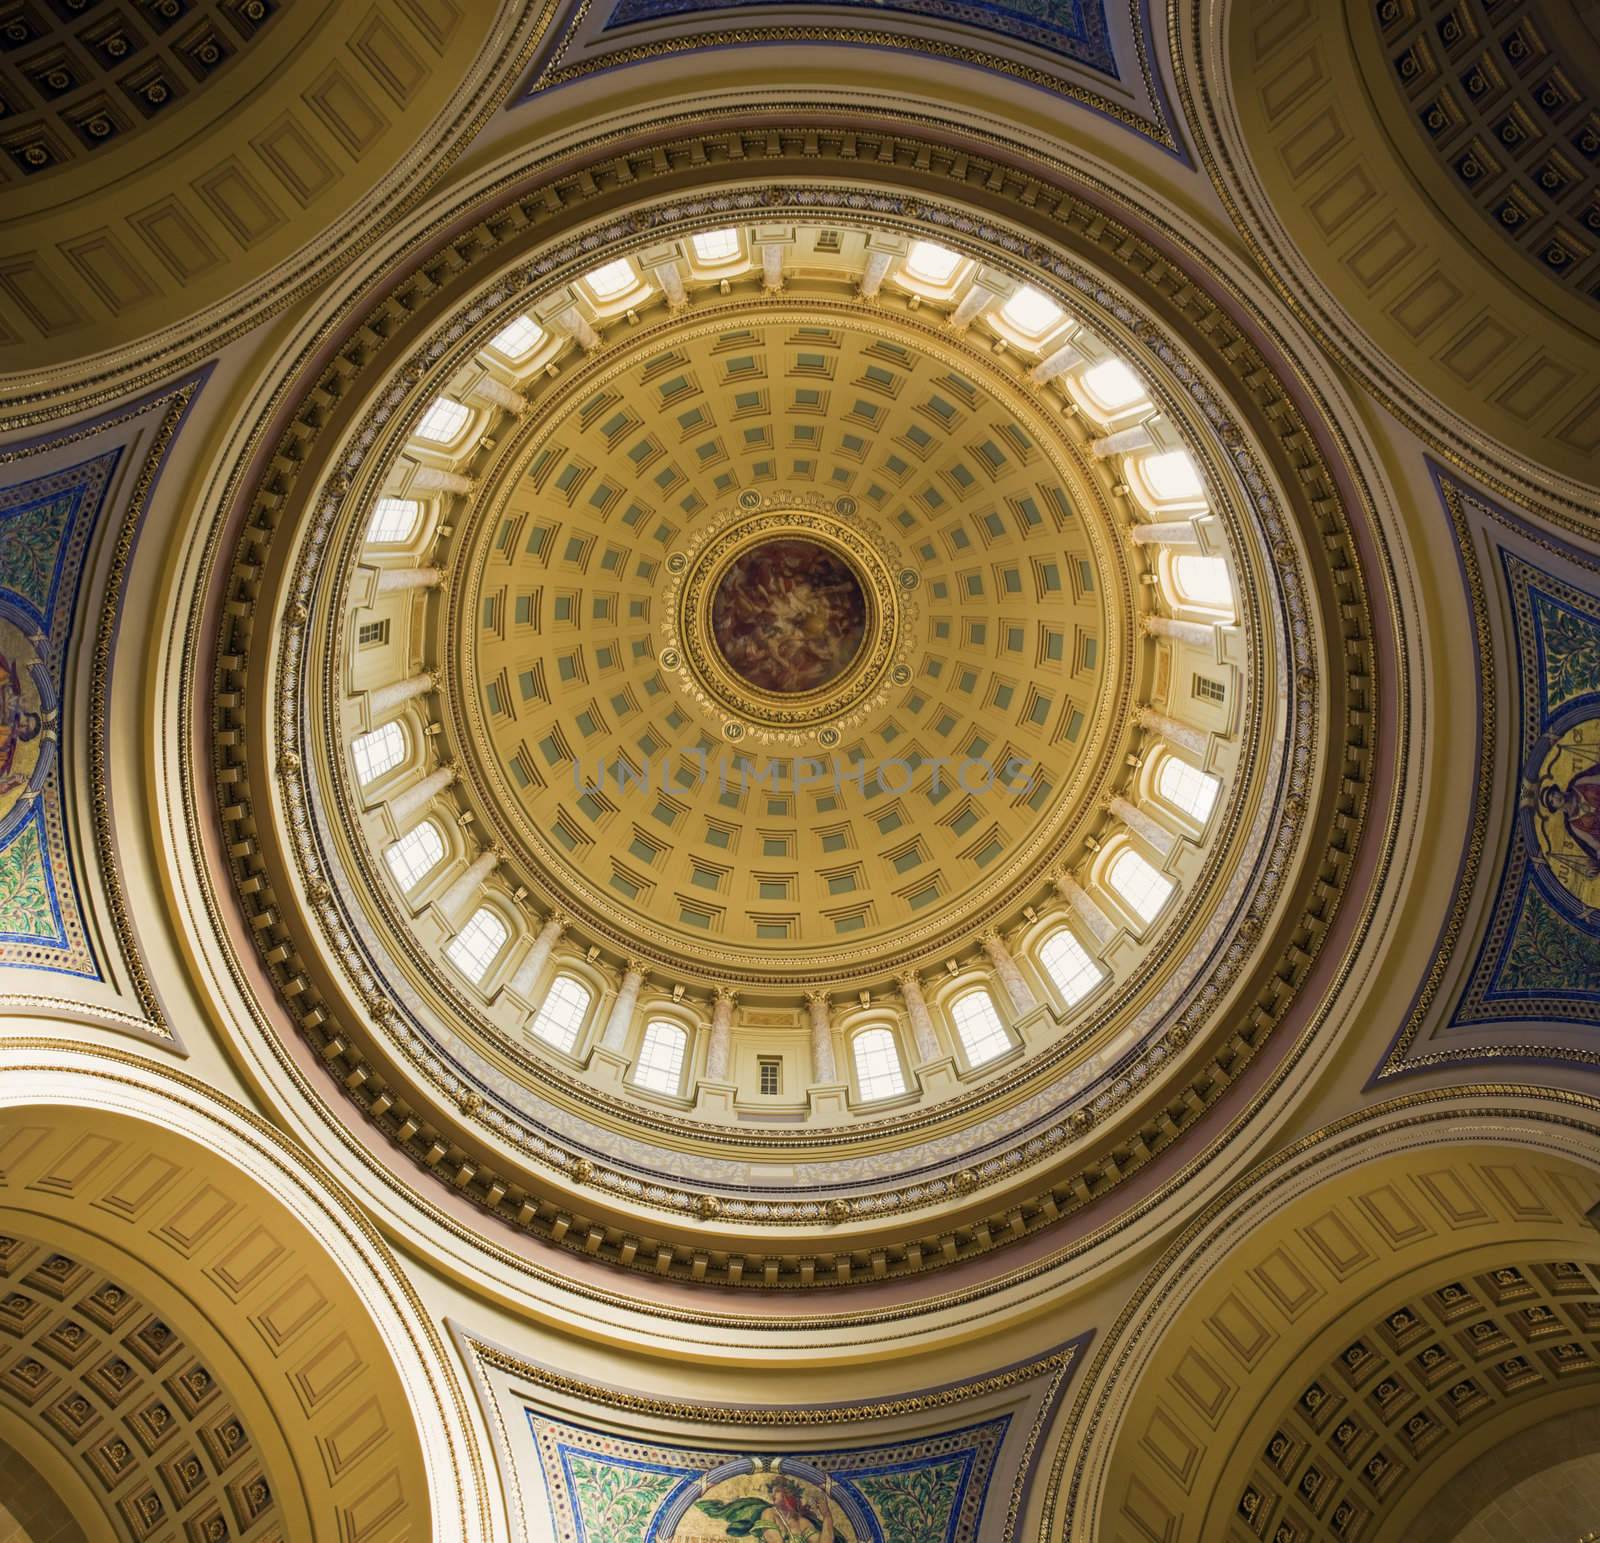 Dome of Captiol Building by benkrut